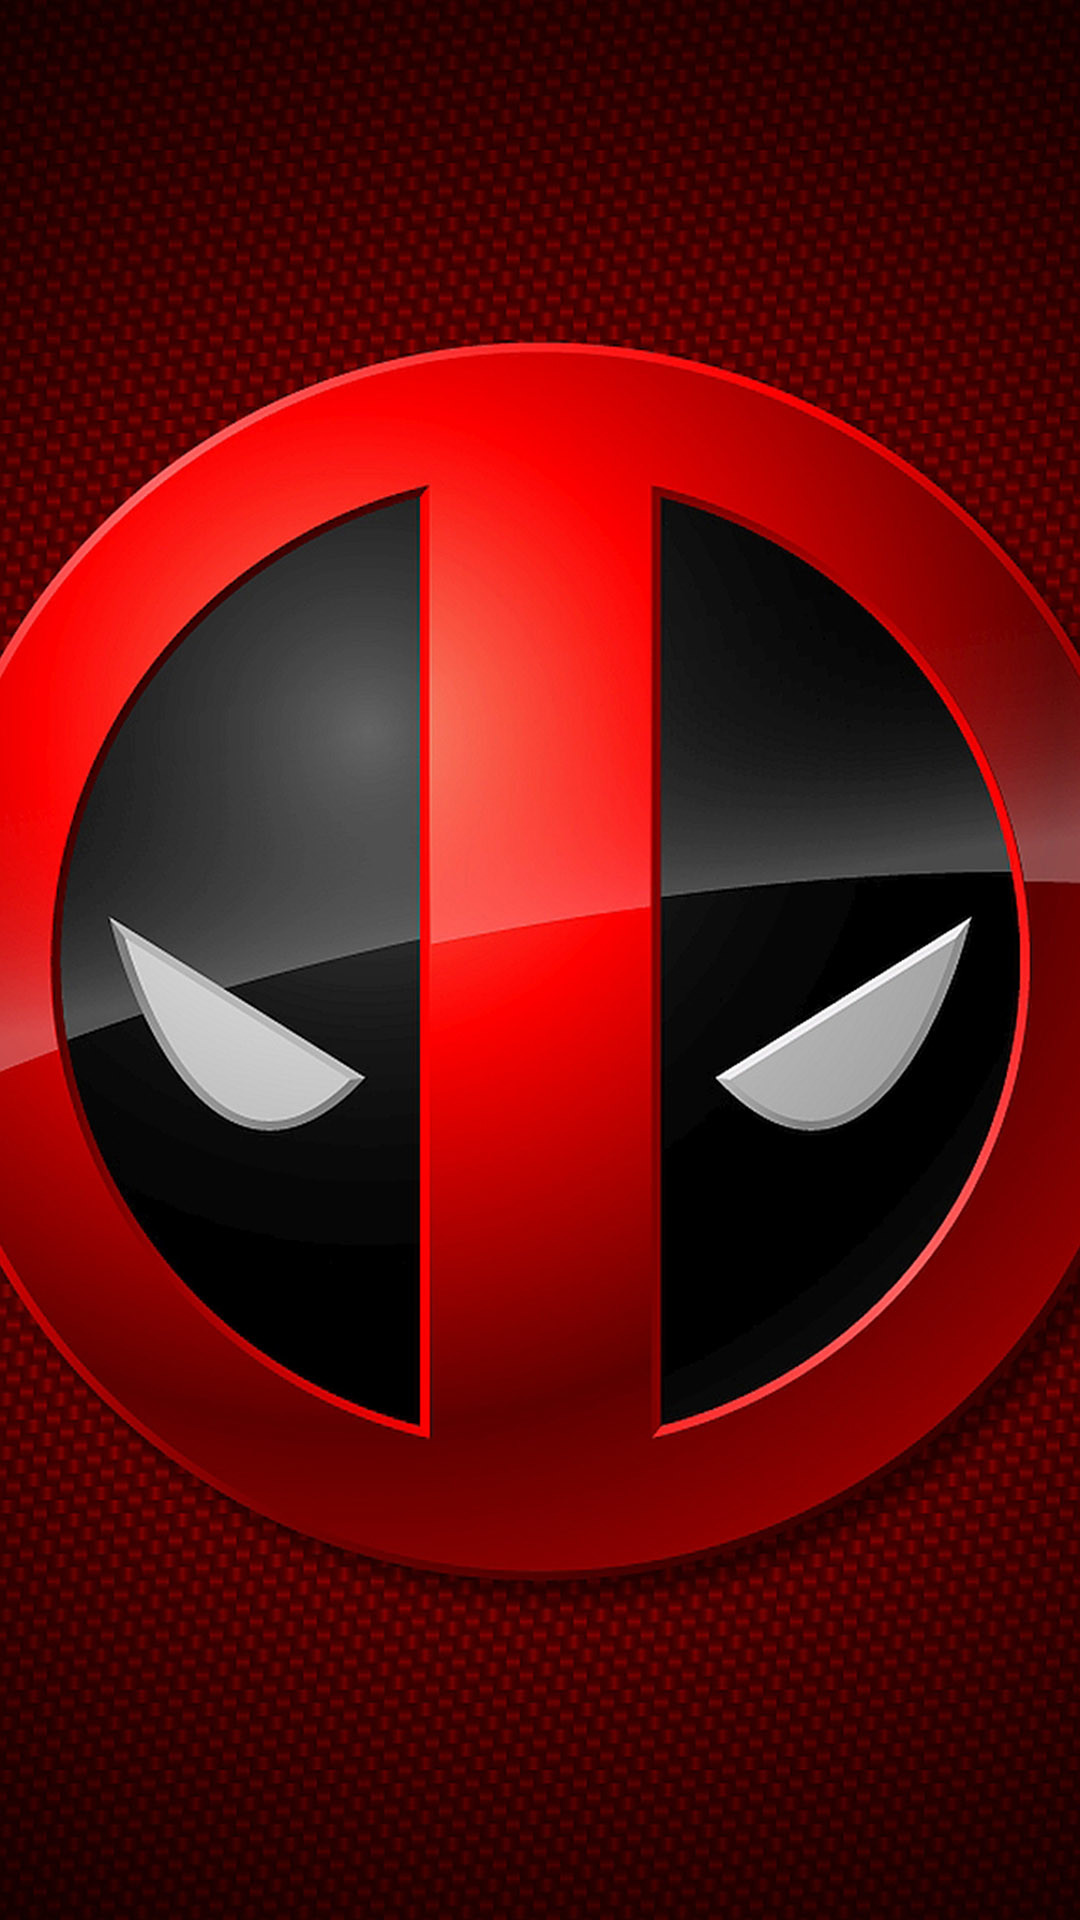 1080x1920 Beautiful 77 Deadpool Galaxy S7 Edge Wallpaper With 1080 x 1080 For free  Download